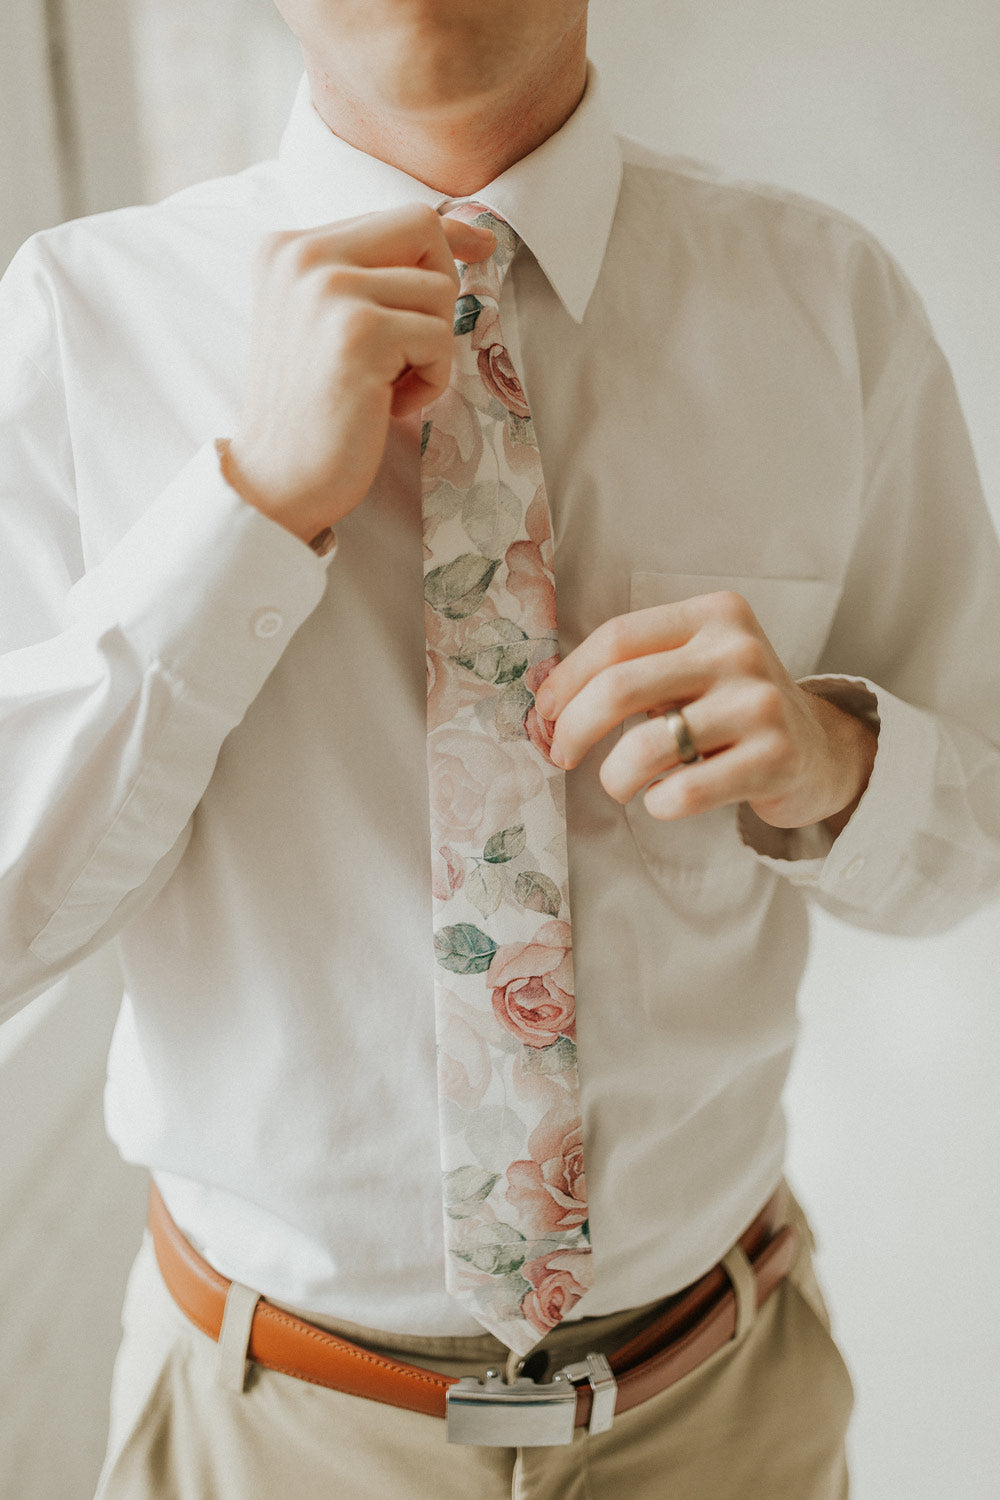 Smitten tie worn with a white shirt, brown belt and khaki pants.